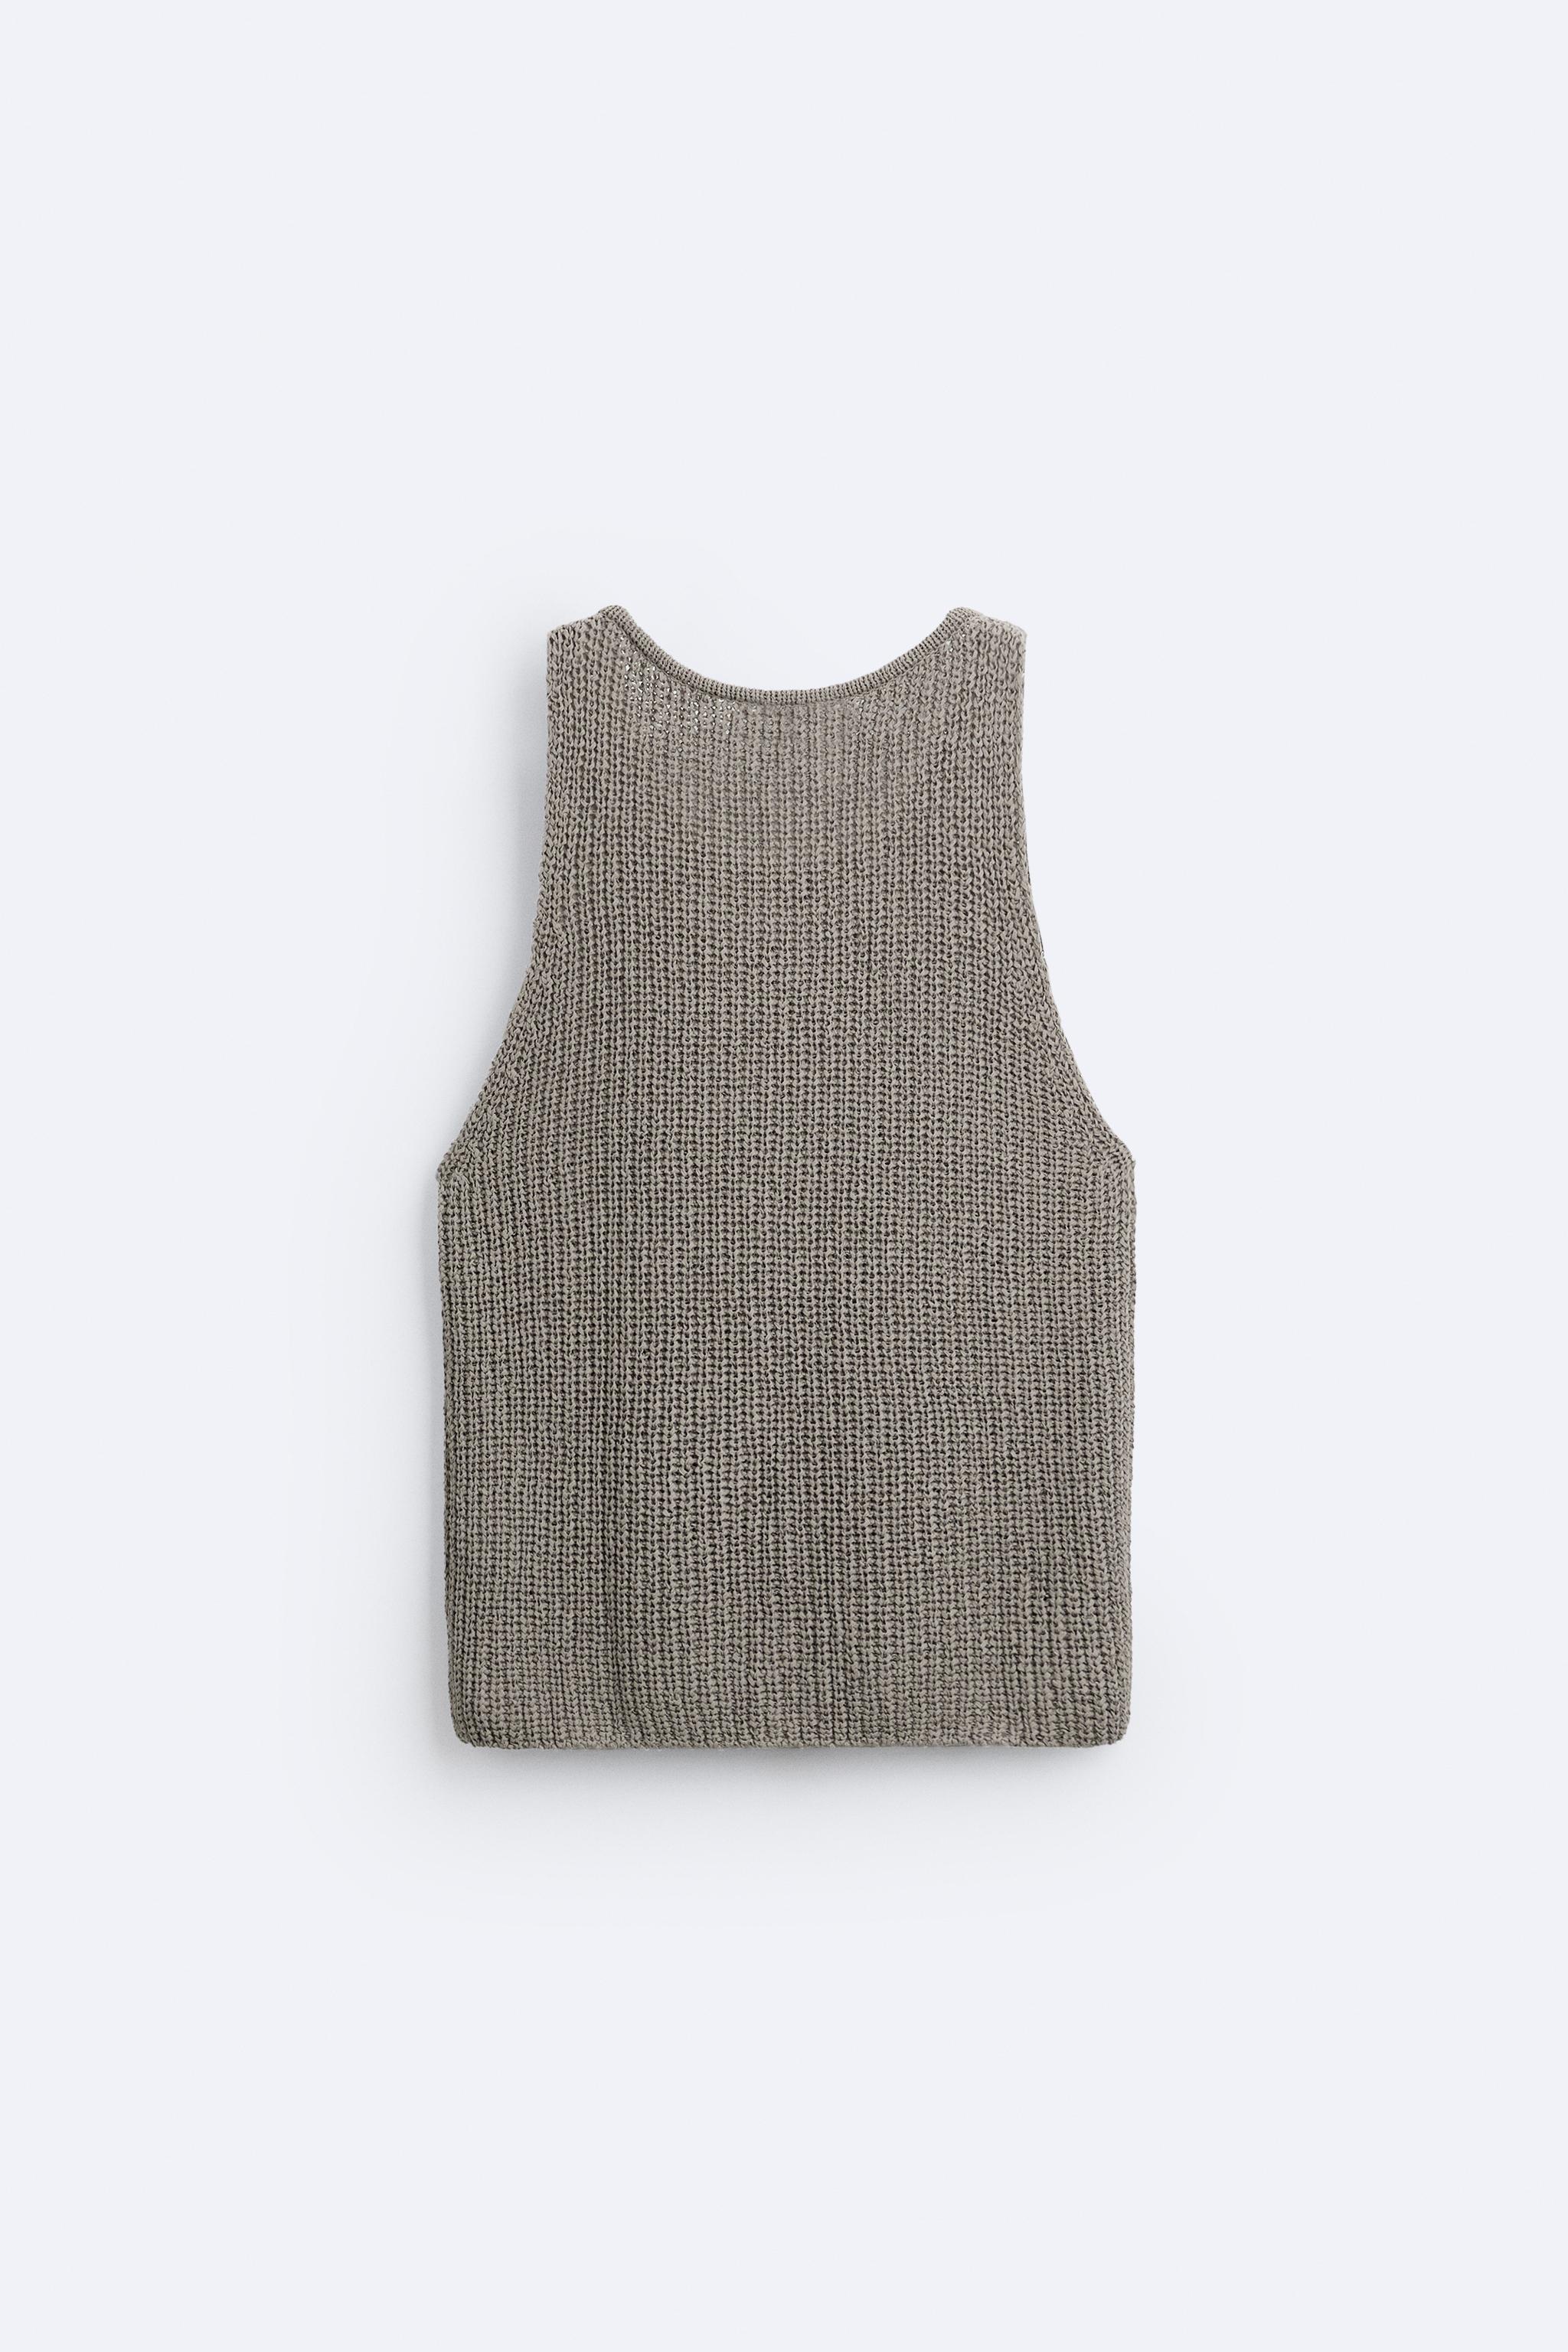 STRUCTURED MESH KNIT TANK - Taupe gray